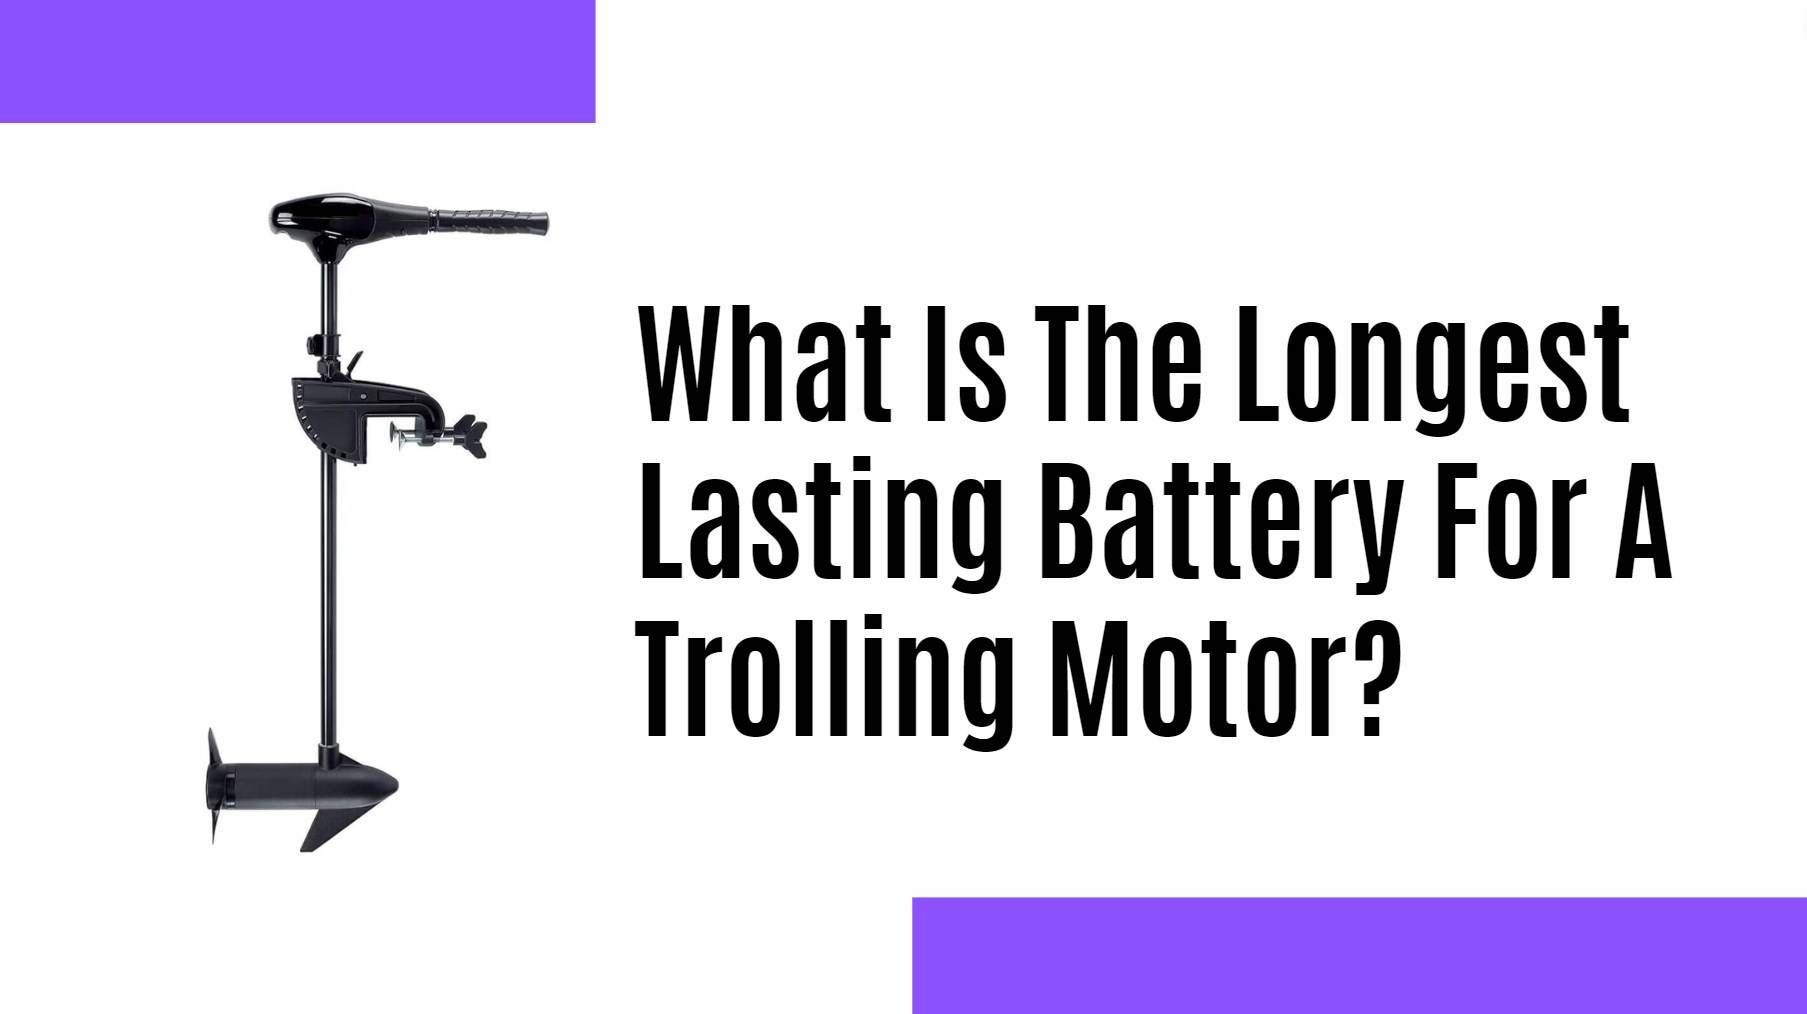 Trolling Motor lithium battery factory manufacturer. What Is The Longest Lasting Battery For A Trolling Motor?